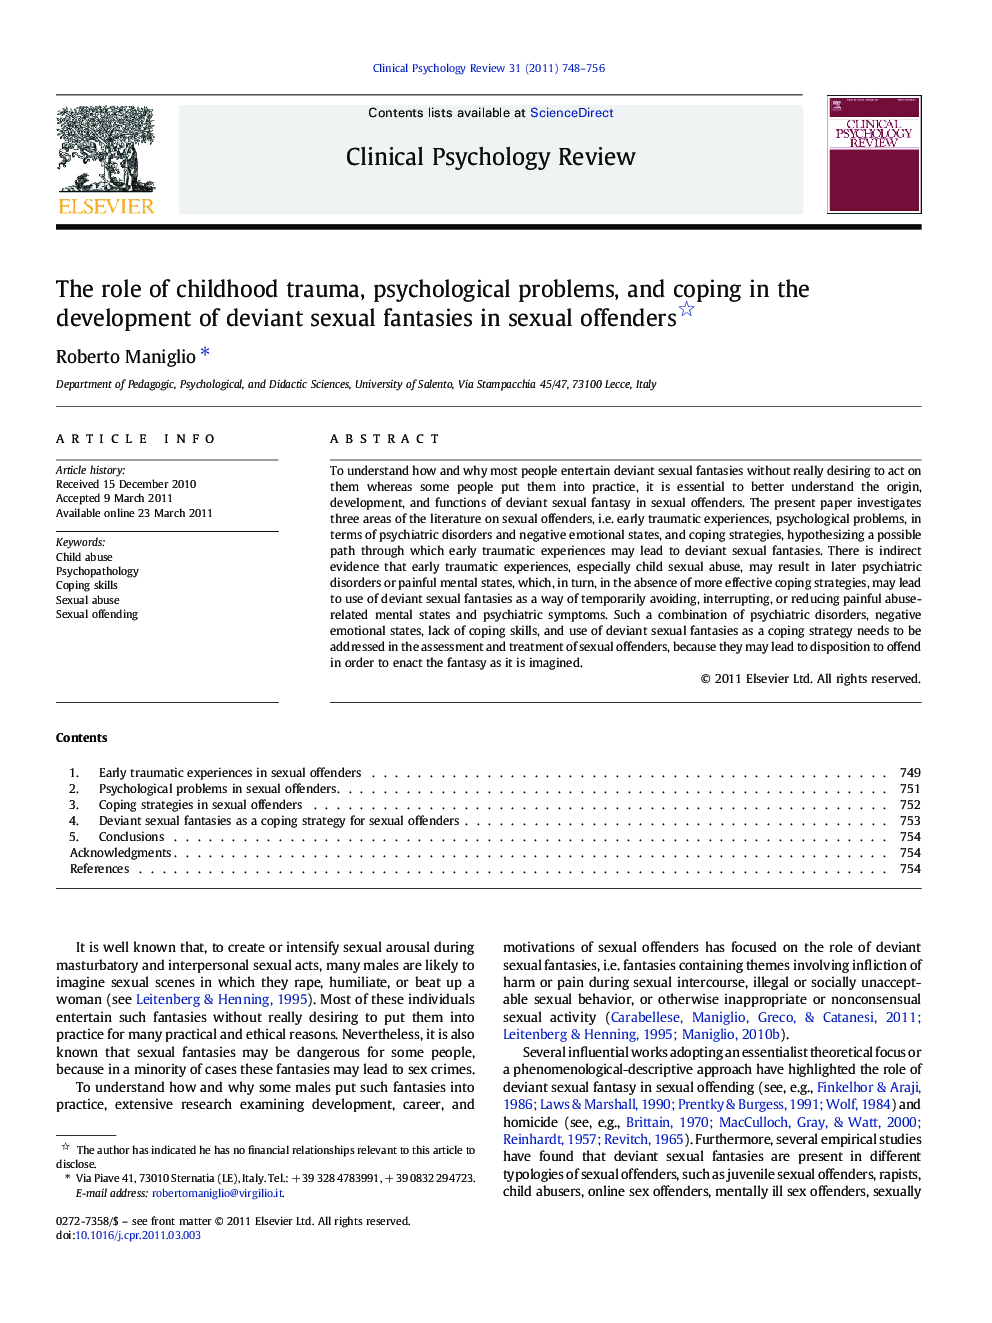 The role of childhood trauma, psychological problems, and coping in the development of deviant sexual fantasies in sexual offenders 